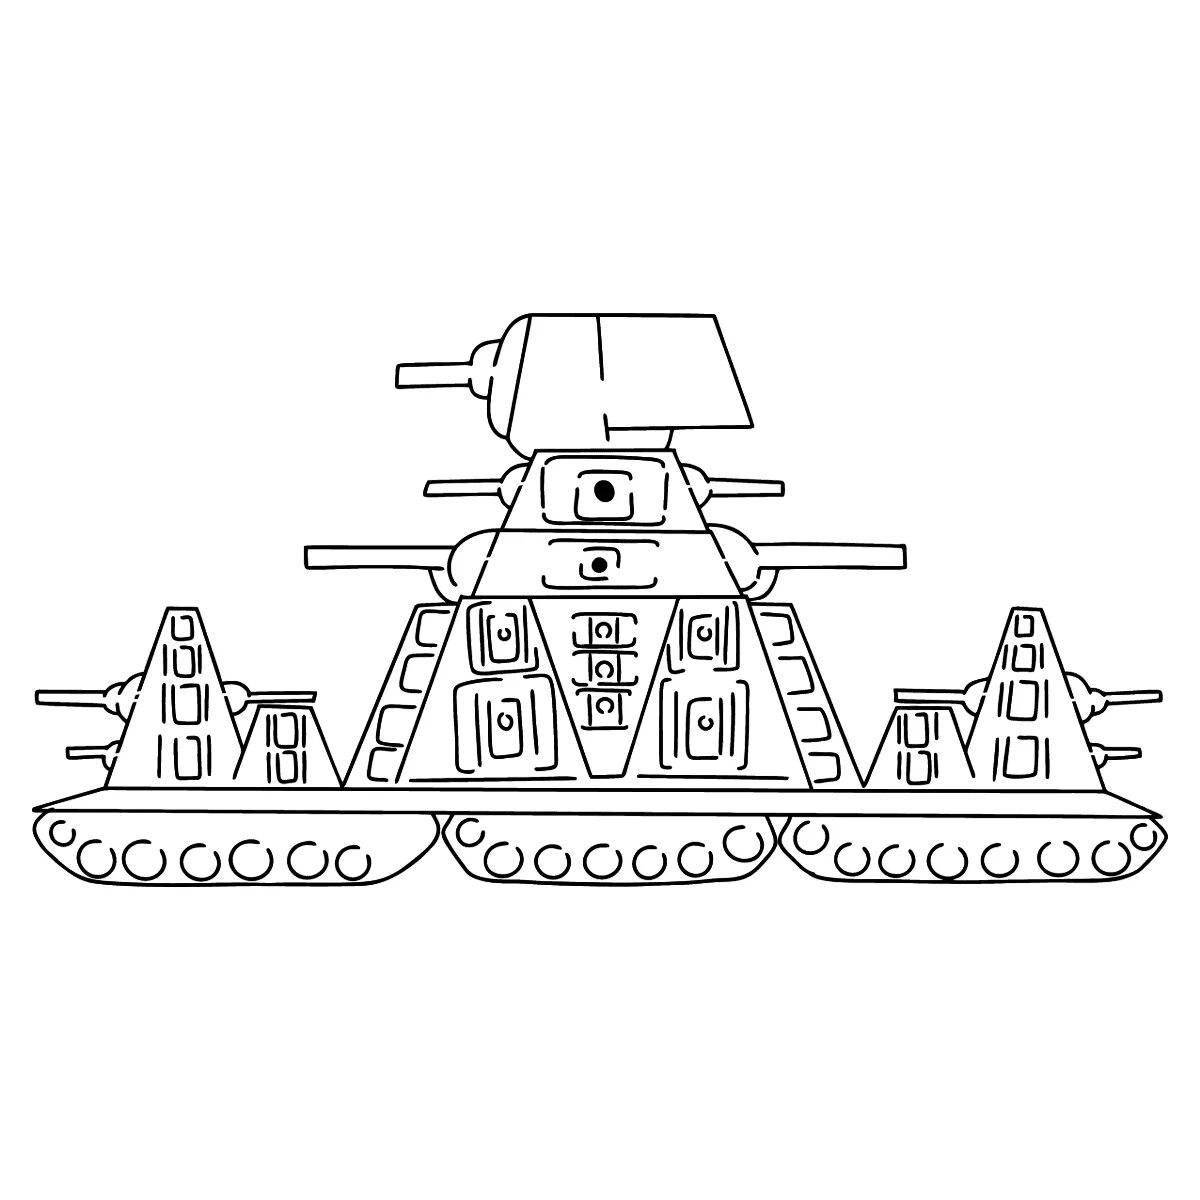 Exciting coloring of the karl 44 tank